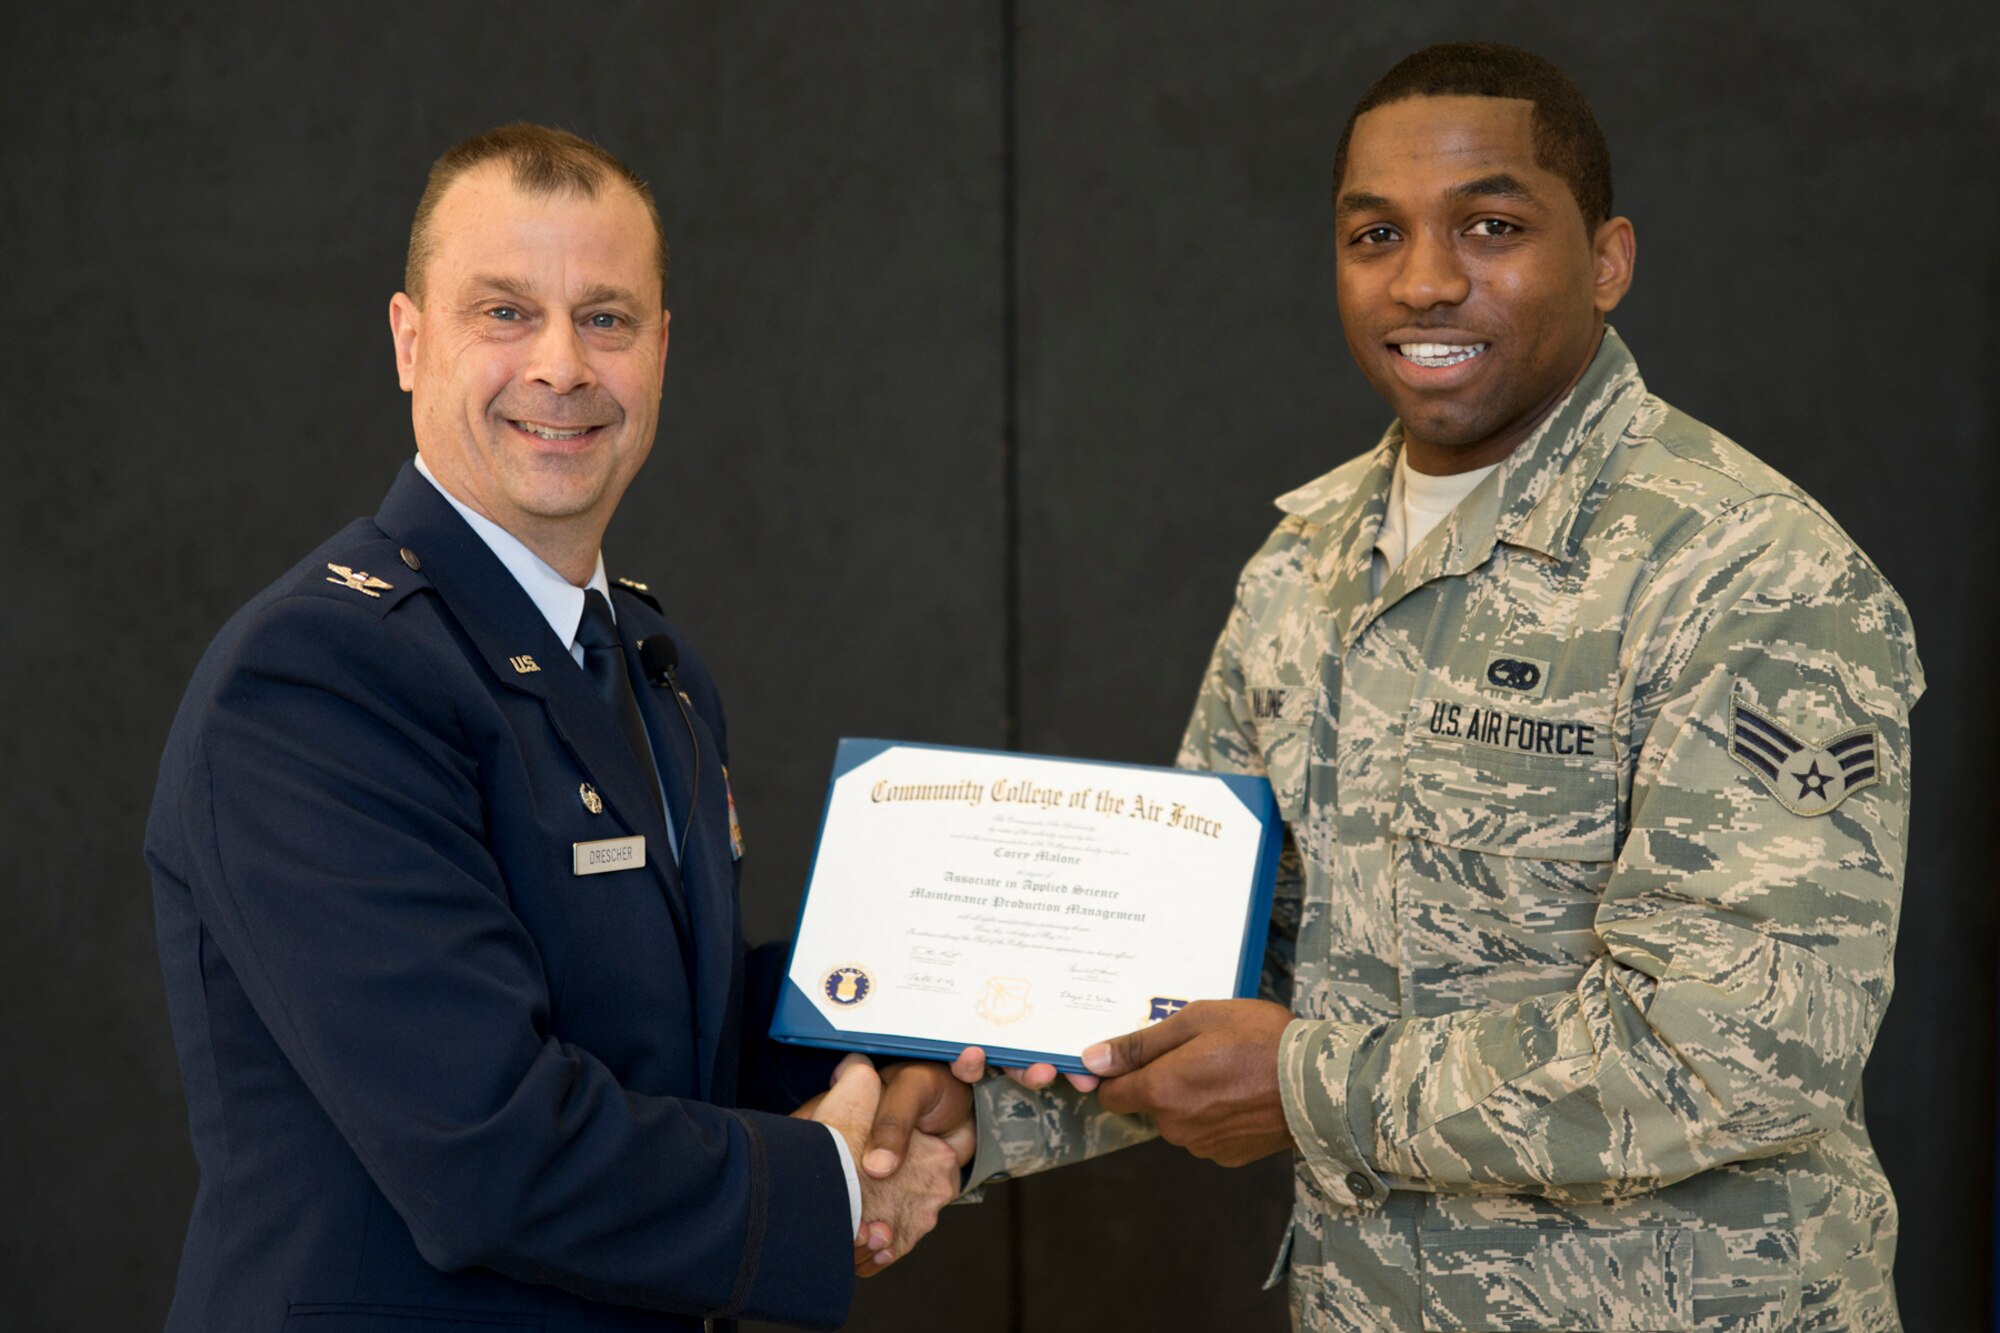 U.S. Air Force Col. Craig Drescher, commander, 913th Airlift Group, and Senior Airman Corey Malone, 913th Maintenance Squadron, maintenance management production technician, pose for a photo during Commander’s Call at Little Rock Air Force Base, Ark., Dec. 6, 2015. Malone received his Community College of the Air Force Associates Degree in Maintenance Production Management. Colonel Drescher also recognized 24 additional Airmen for personal achievements. (U.S. Air Force photo by Master Sgt. Jeff Walston/Released) 